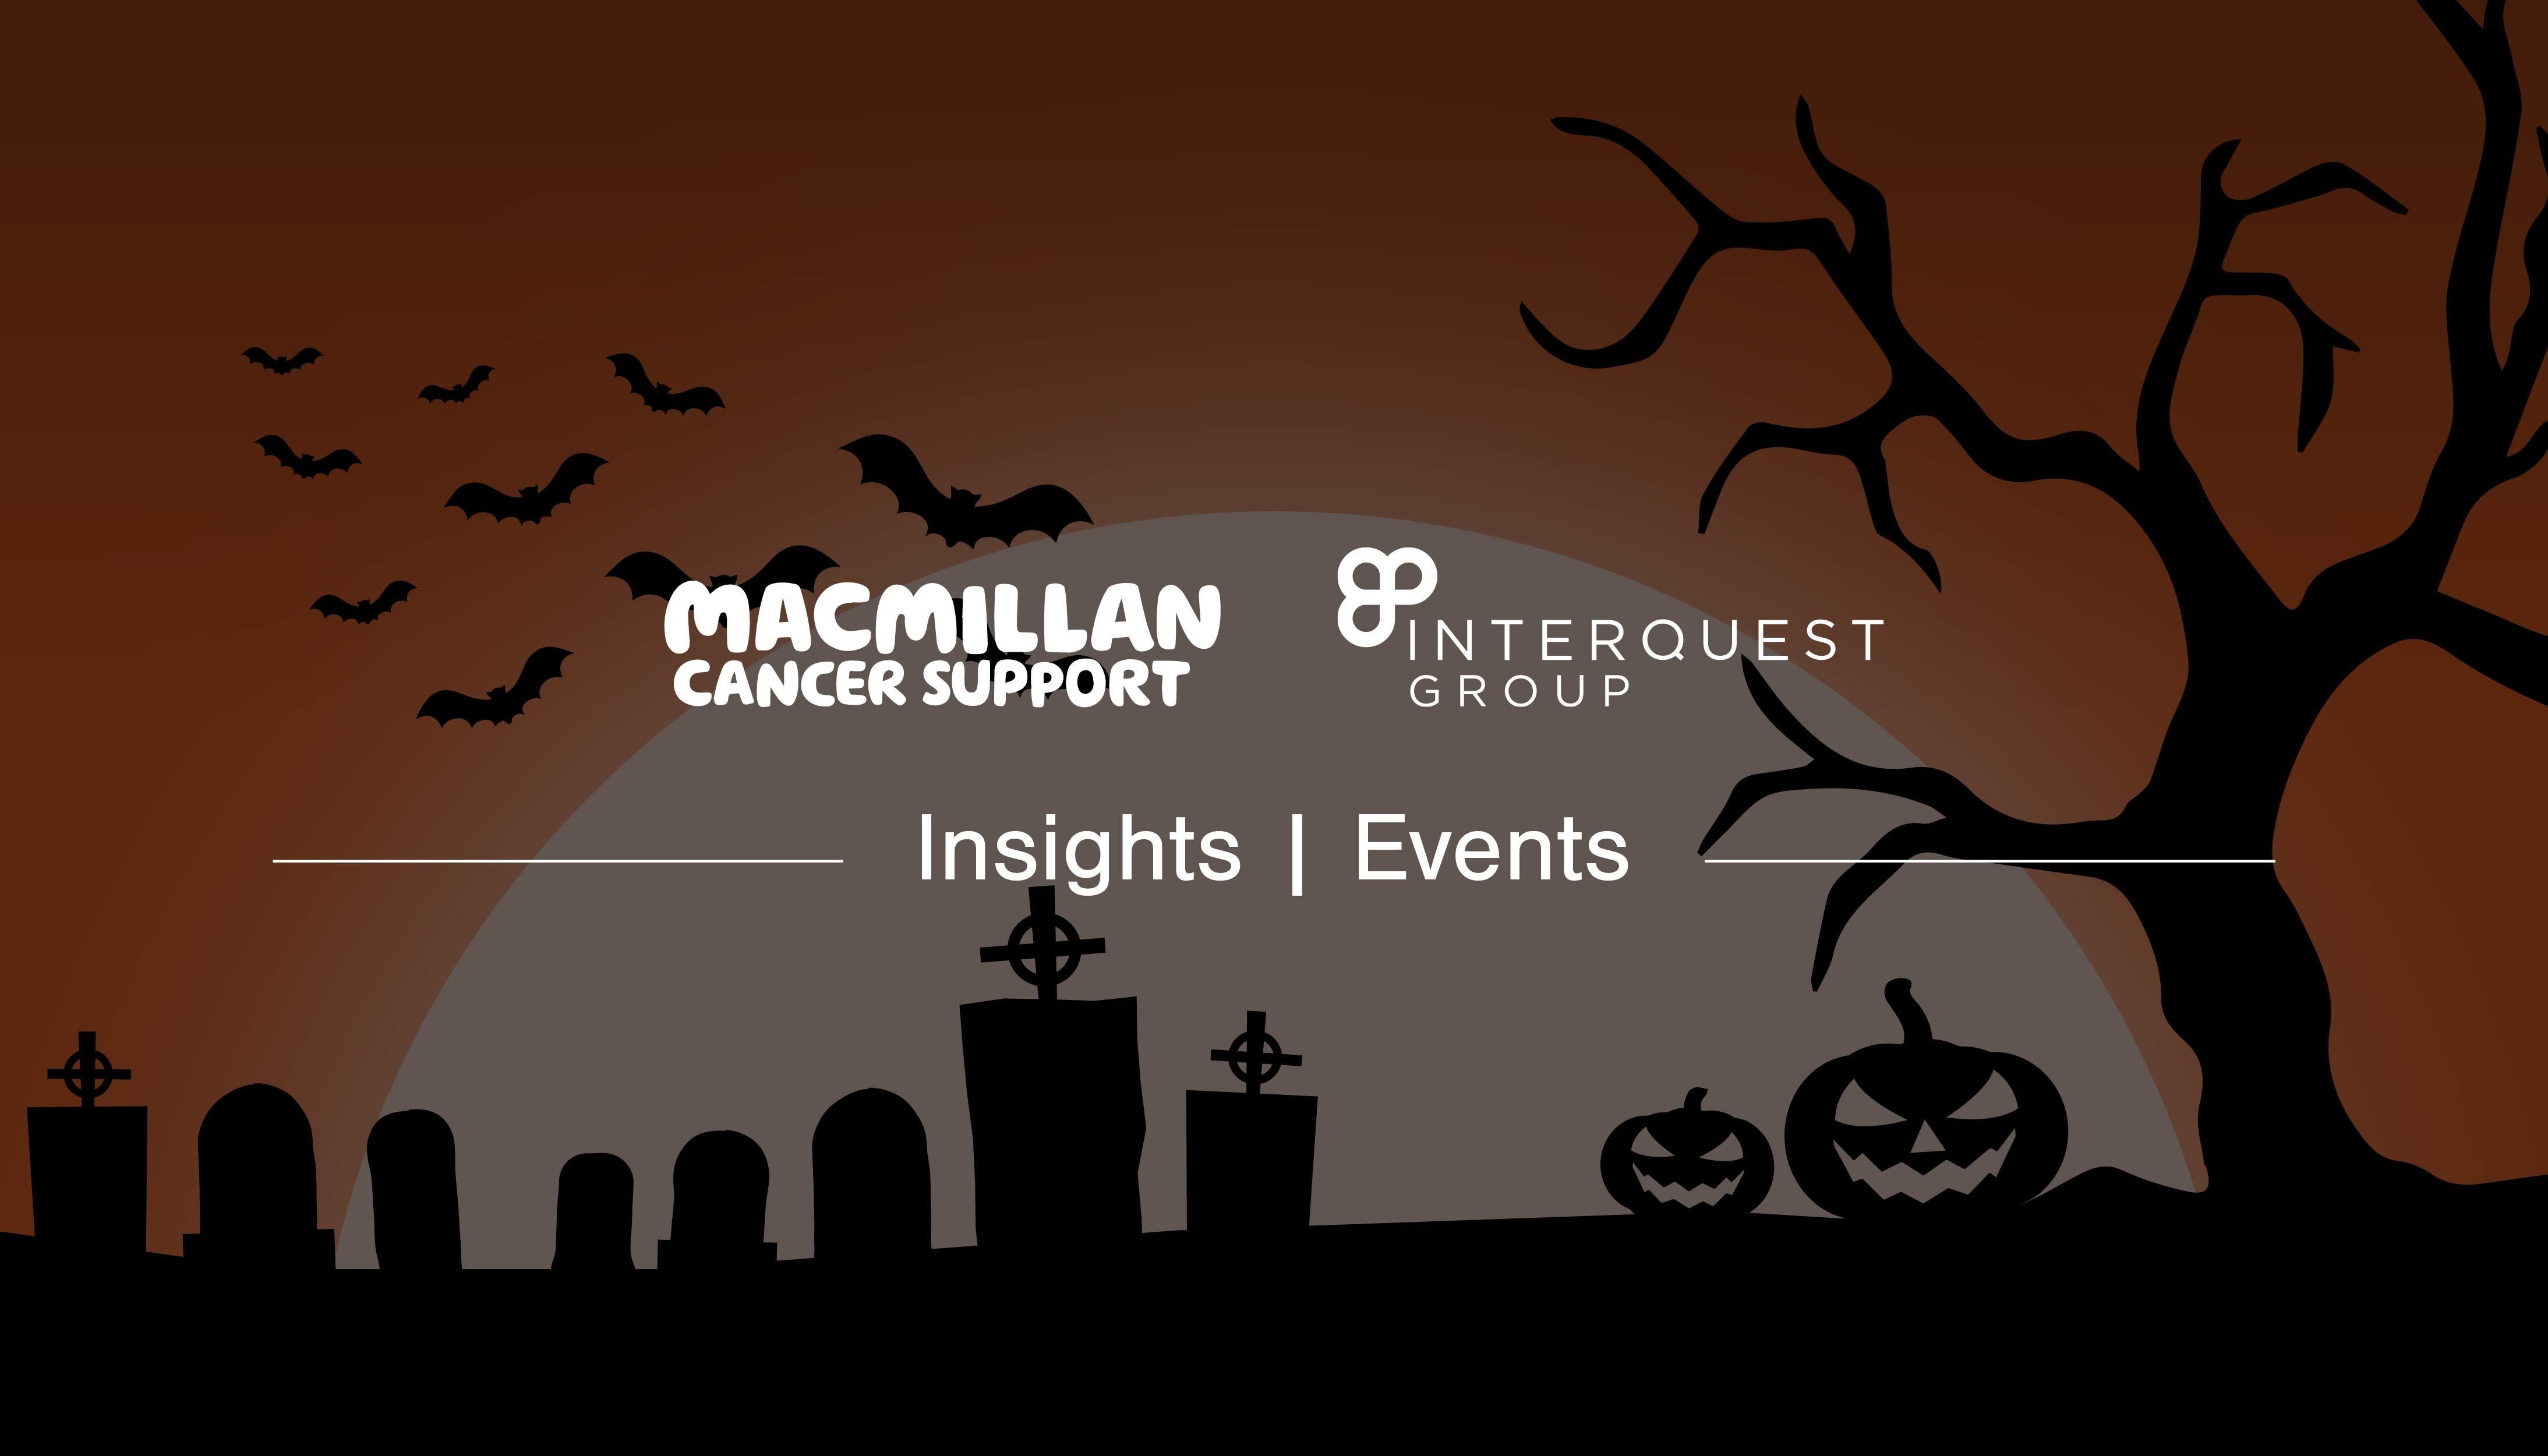 Halloween blog banner with InterQuest Group and Macmillan Cancer Support logos white